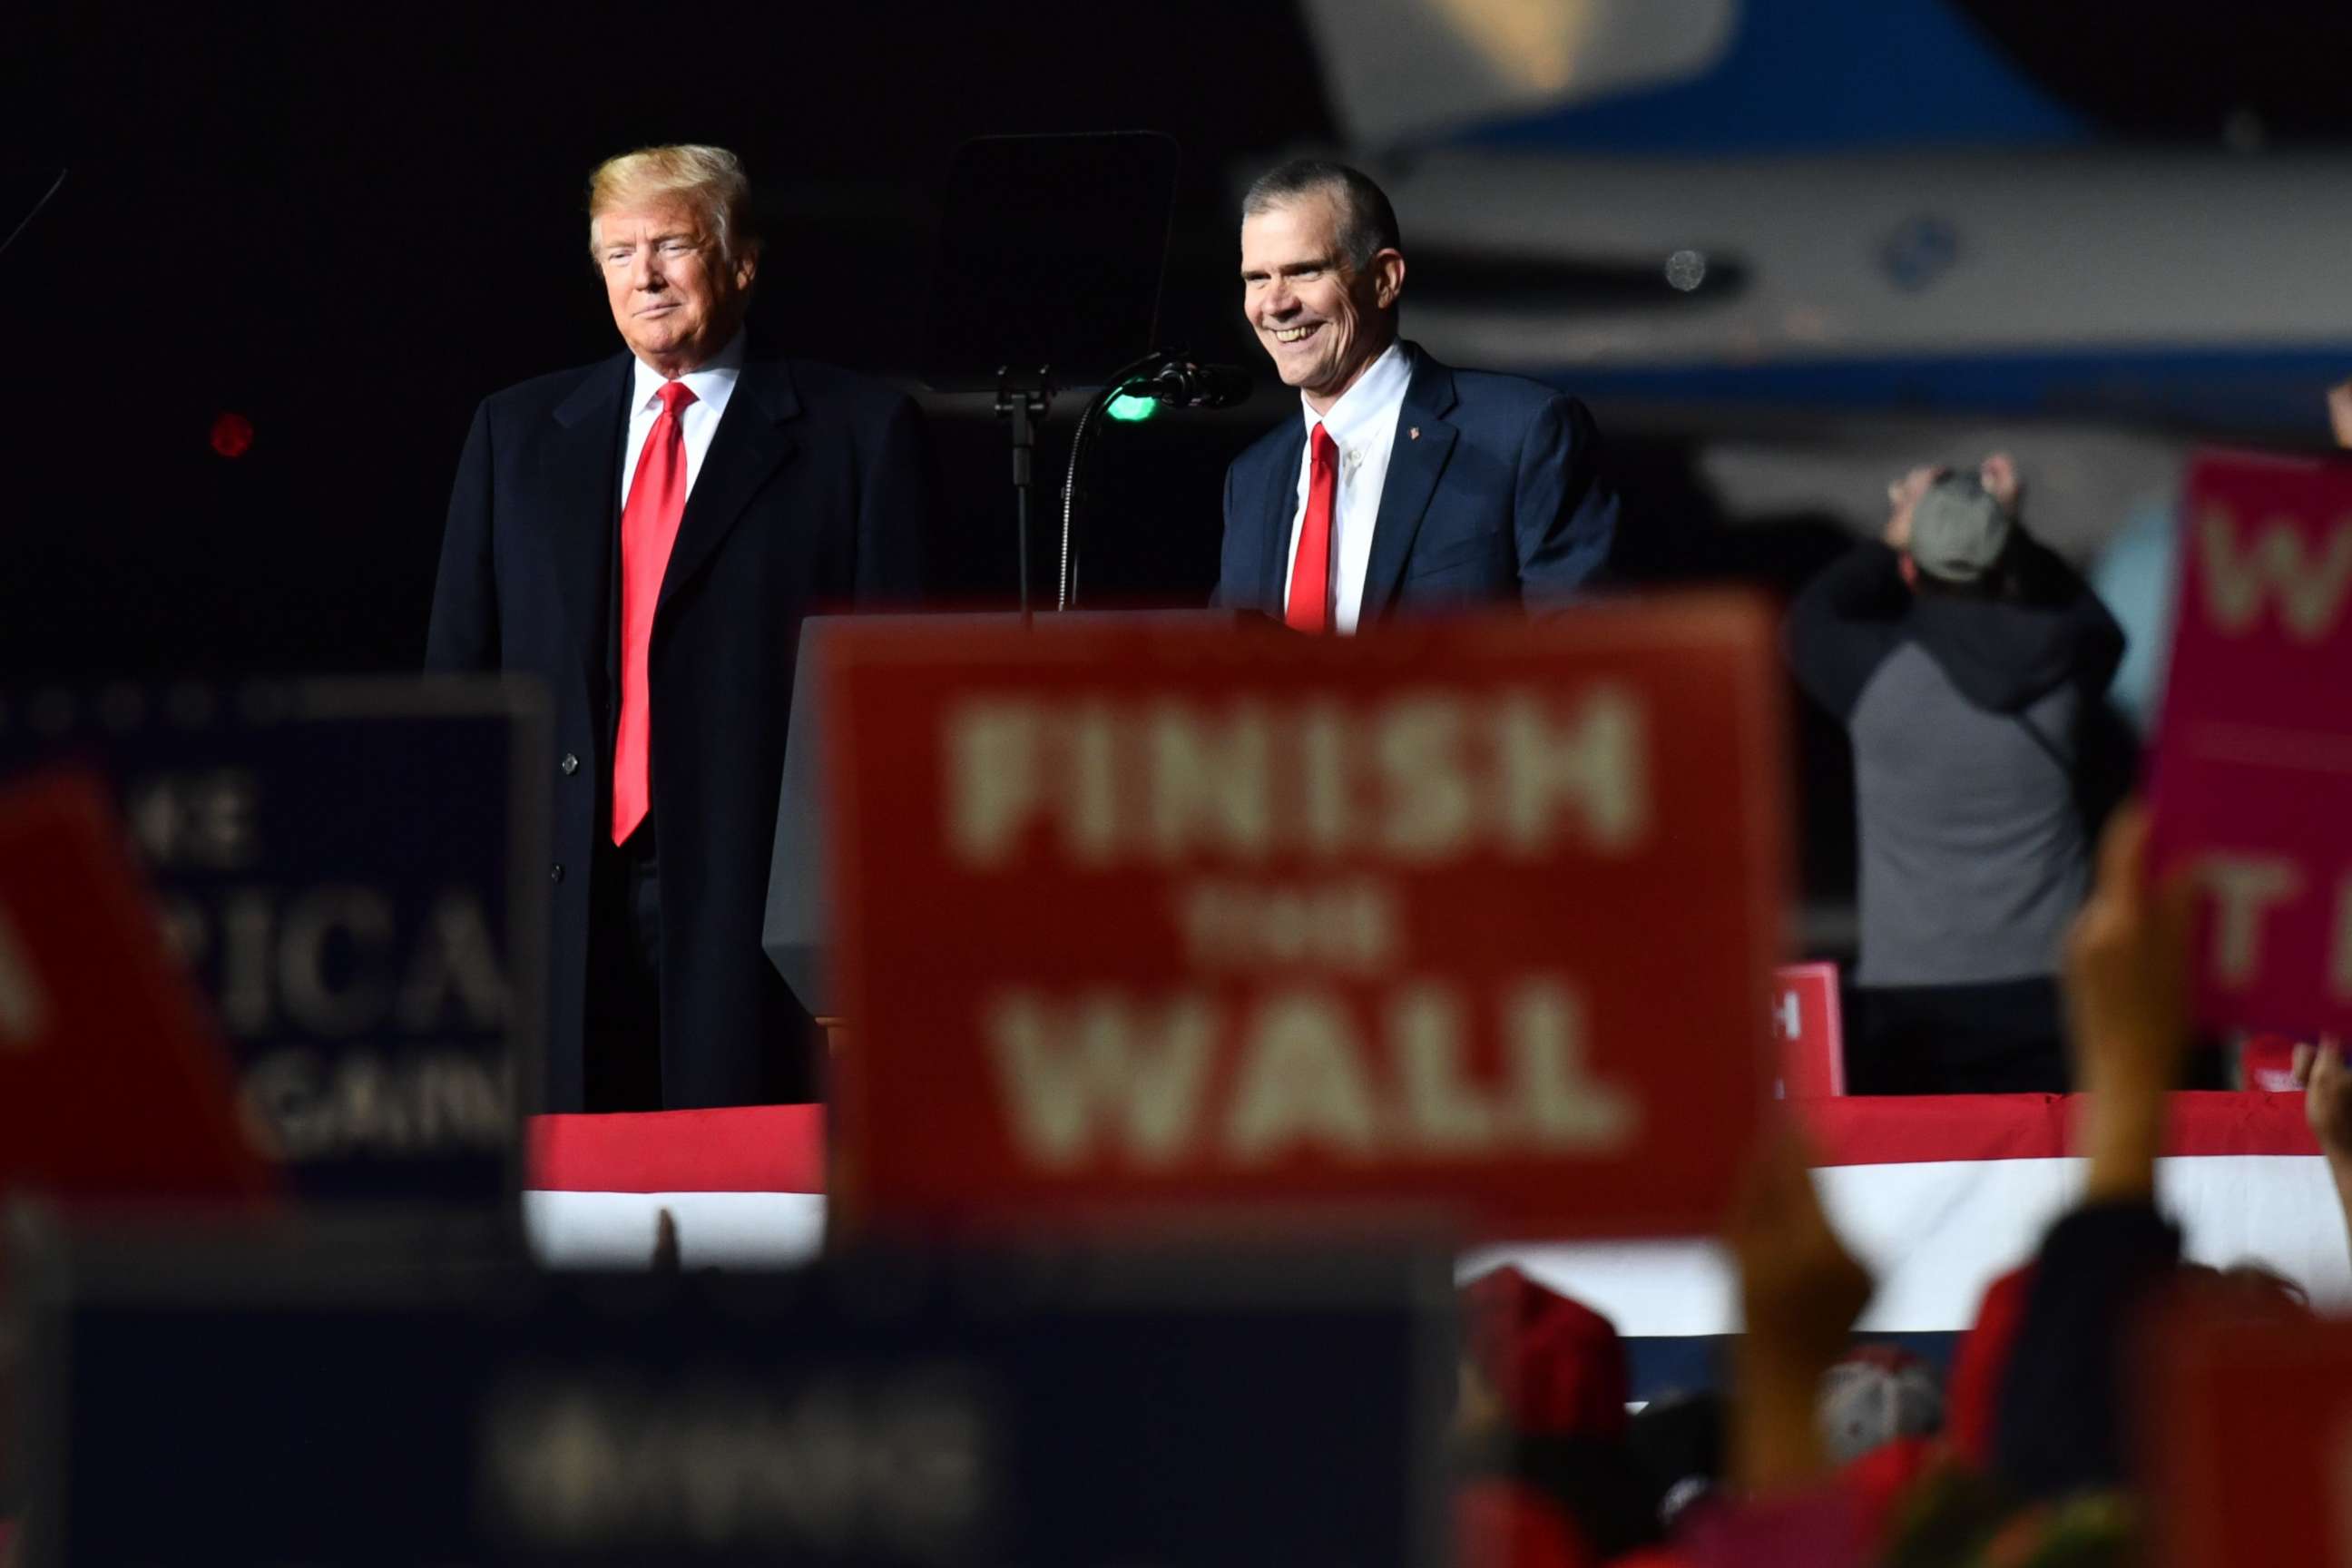 PHOTO: President Donald Trump and Matt Rosendale (R), Republican Auditor and candidate for the US Senate speaks during a "Make America Great" rally in Missoula, Mont., Oct. 18, 2018.